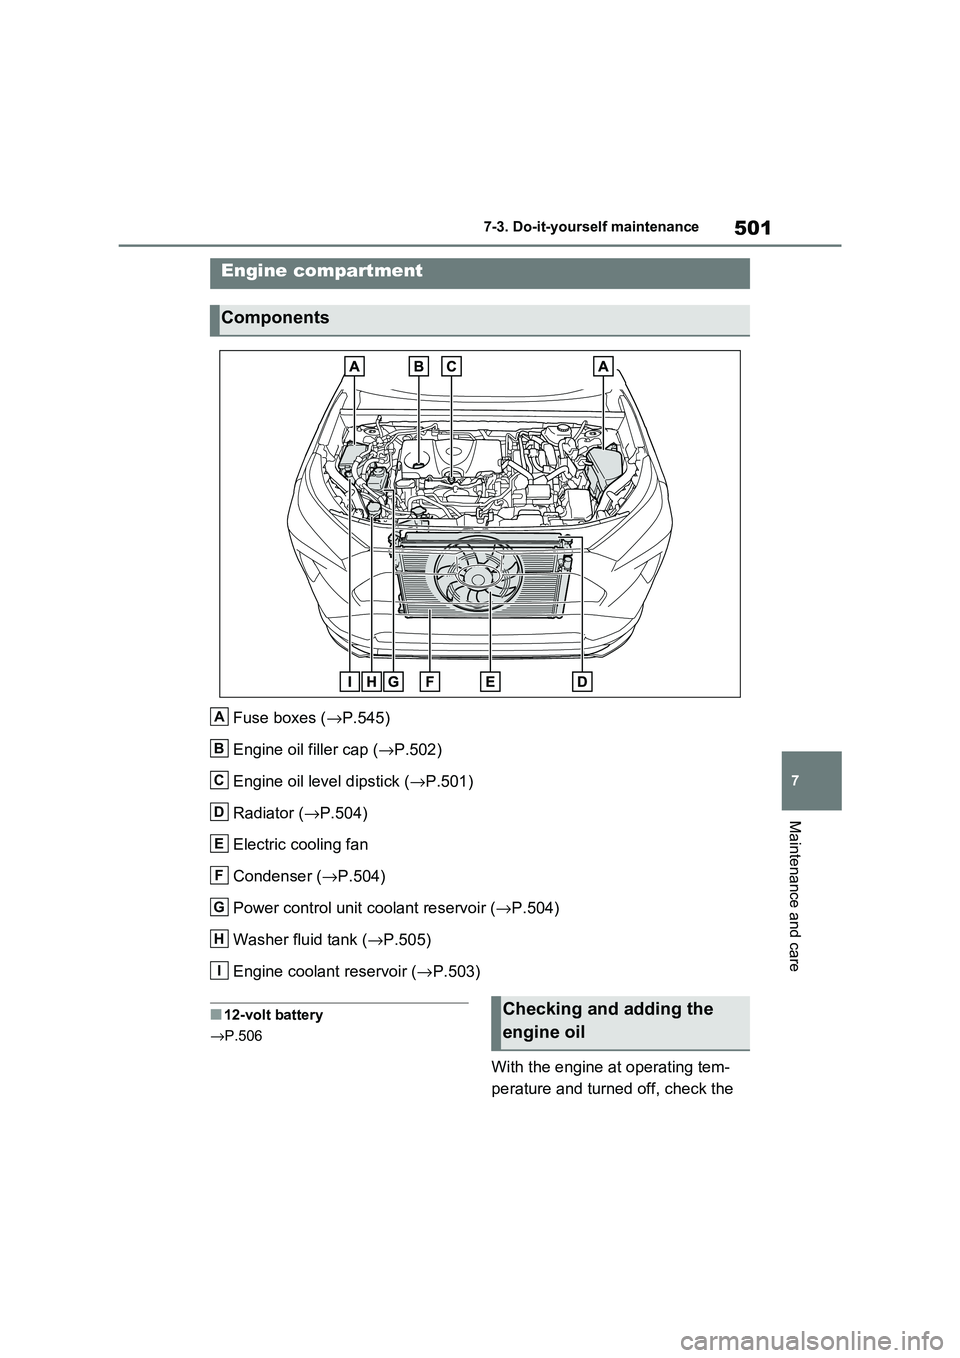 TOYOTA RAV4 PHEV 2021  Owners Manual 501
7 
7-3. Do-it-yours elf maintenance
Maintenance and care
Fuse boxes (→P.545) 
Engine oil filler cap ( →P.502) 
Engine oil level dipstick ( →P.501) 
Radiator ( →P.504) 
Electric cooling fan